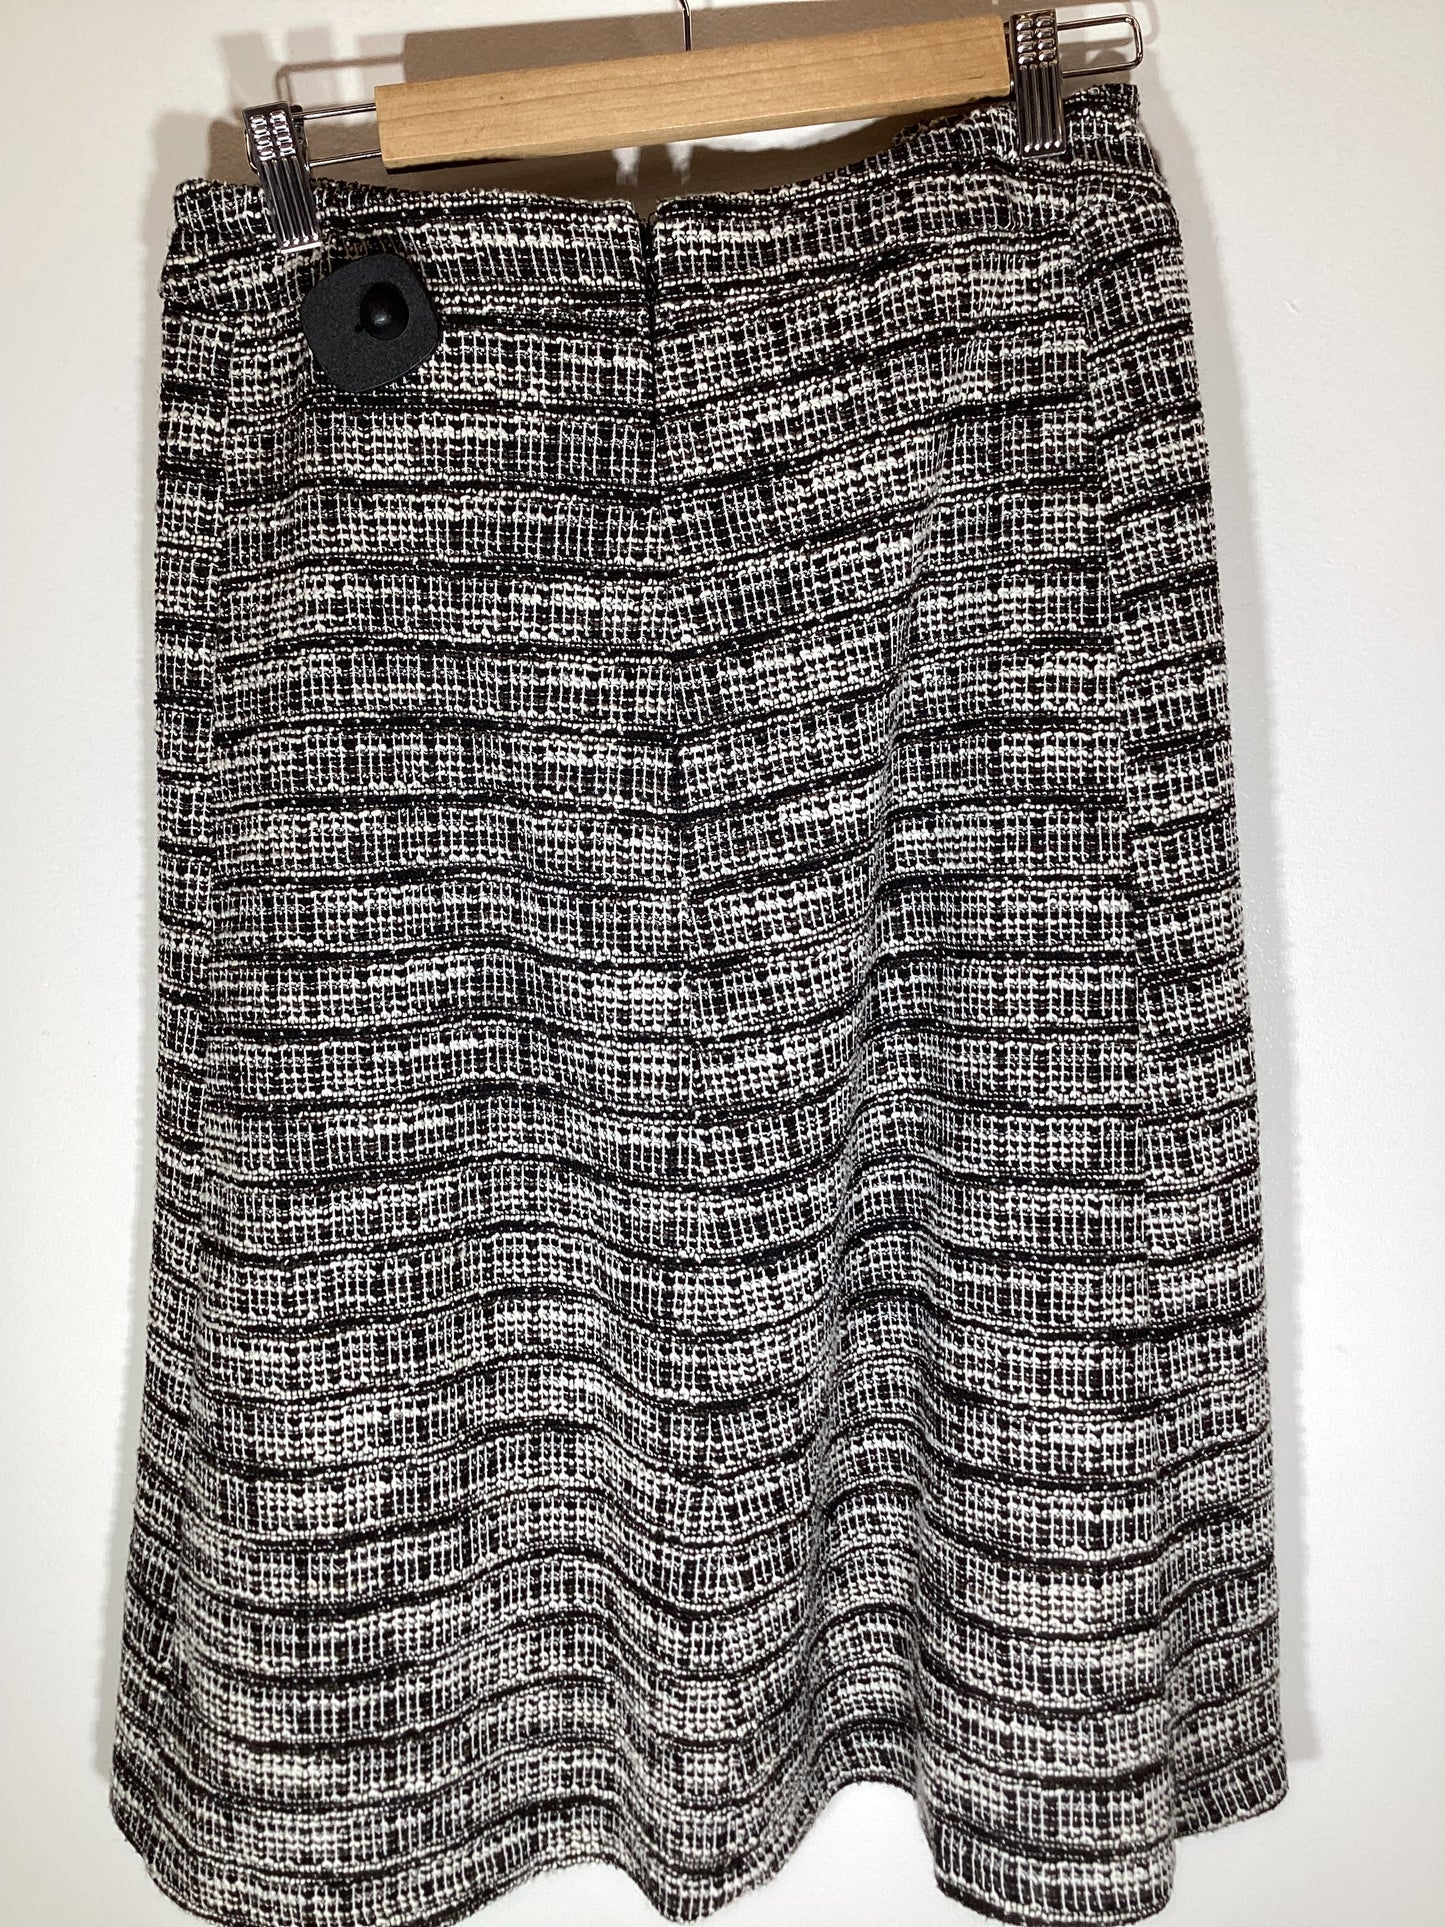 Skirt By Talbots  Size: 3x